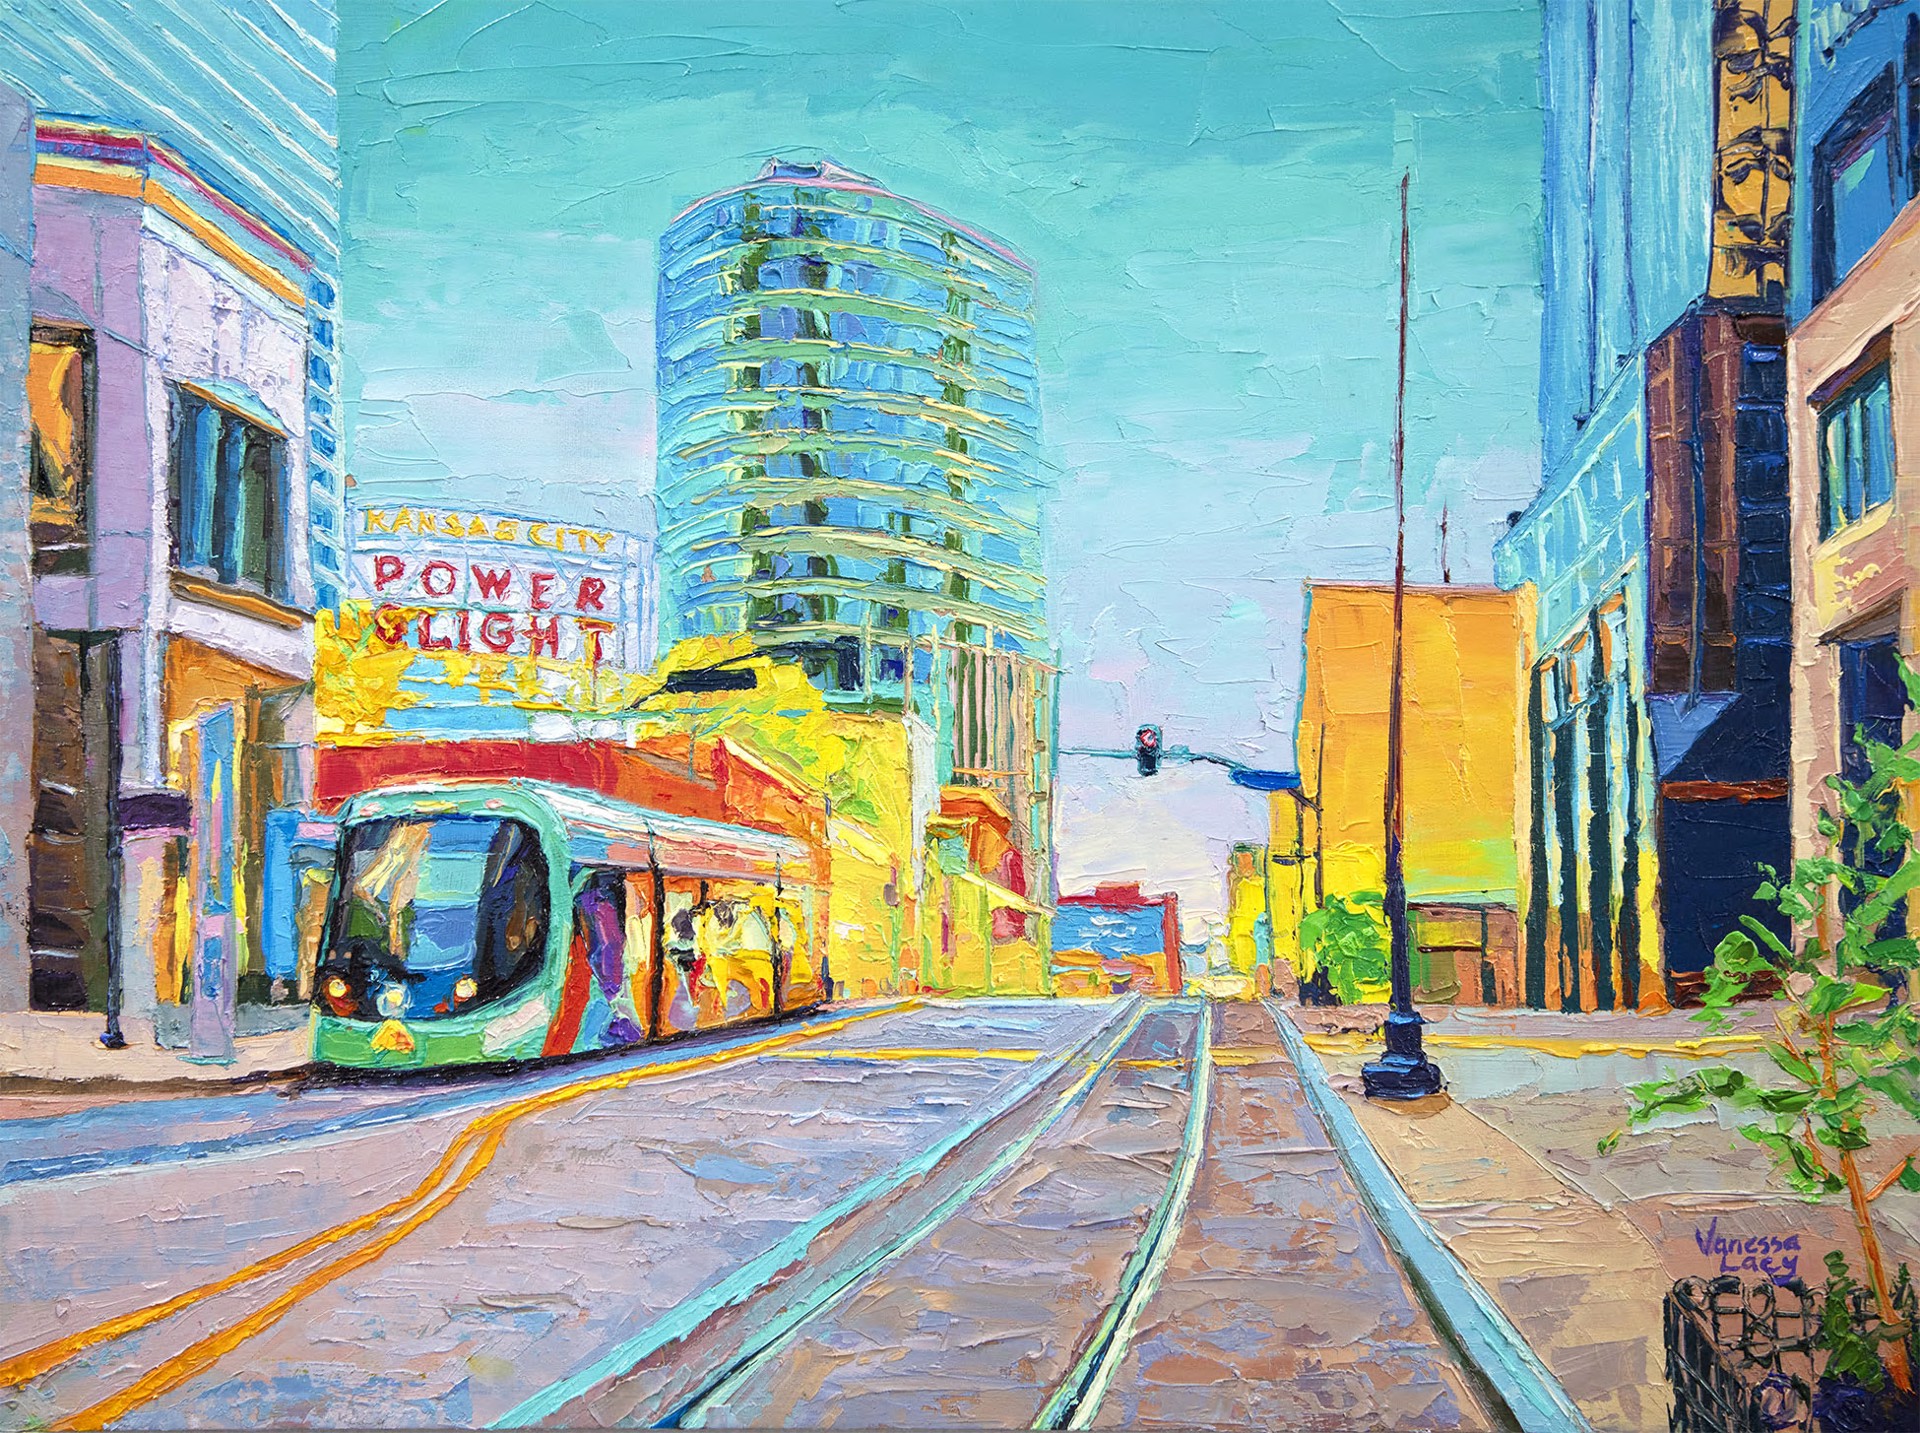 Streetcar in Power and Light by Vanessa Lacy